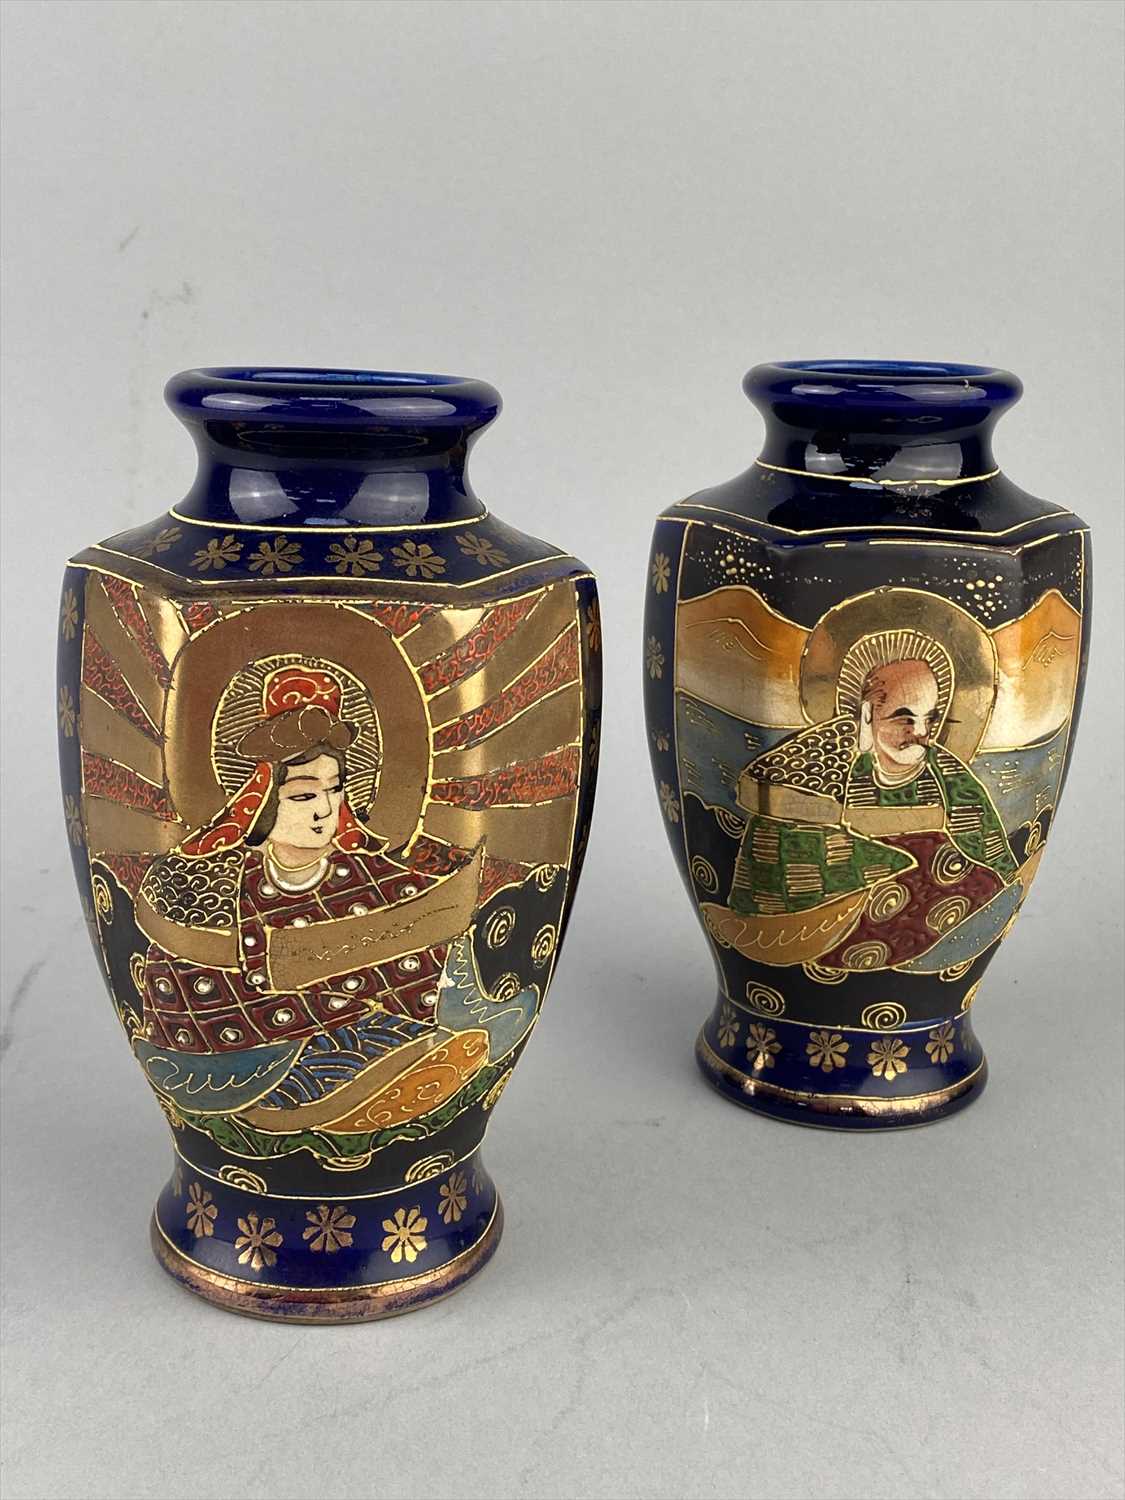 Lot 174 - A PAIR OF JAPANESE VASES AND A PAIR OF MASKS